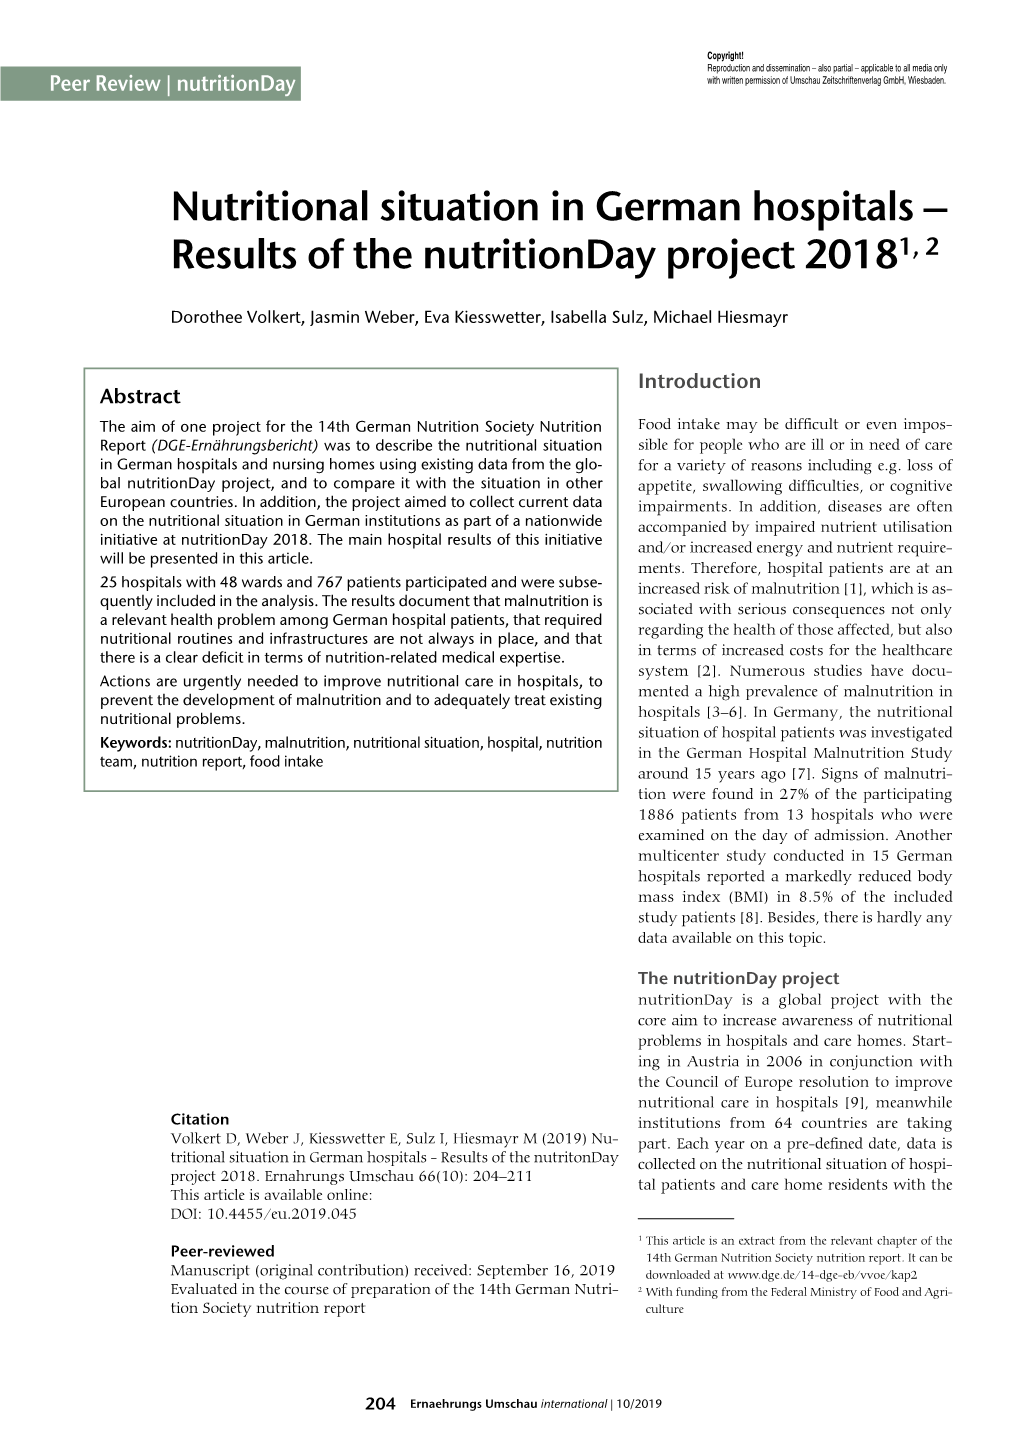 Nutritional Situation in German Hospitals – Results of the Nutritionday Project 20181, 2